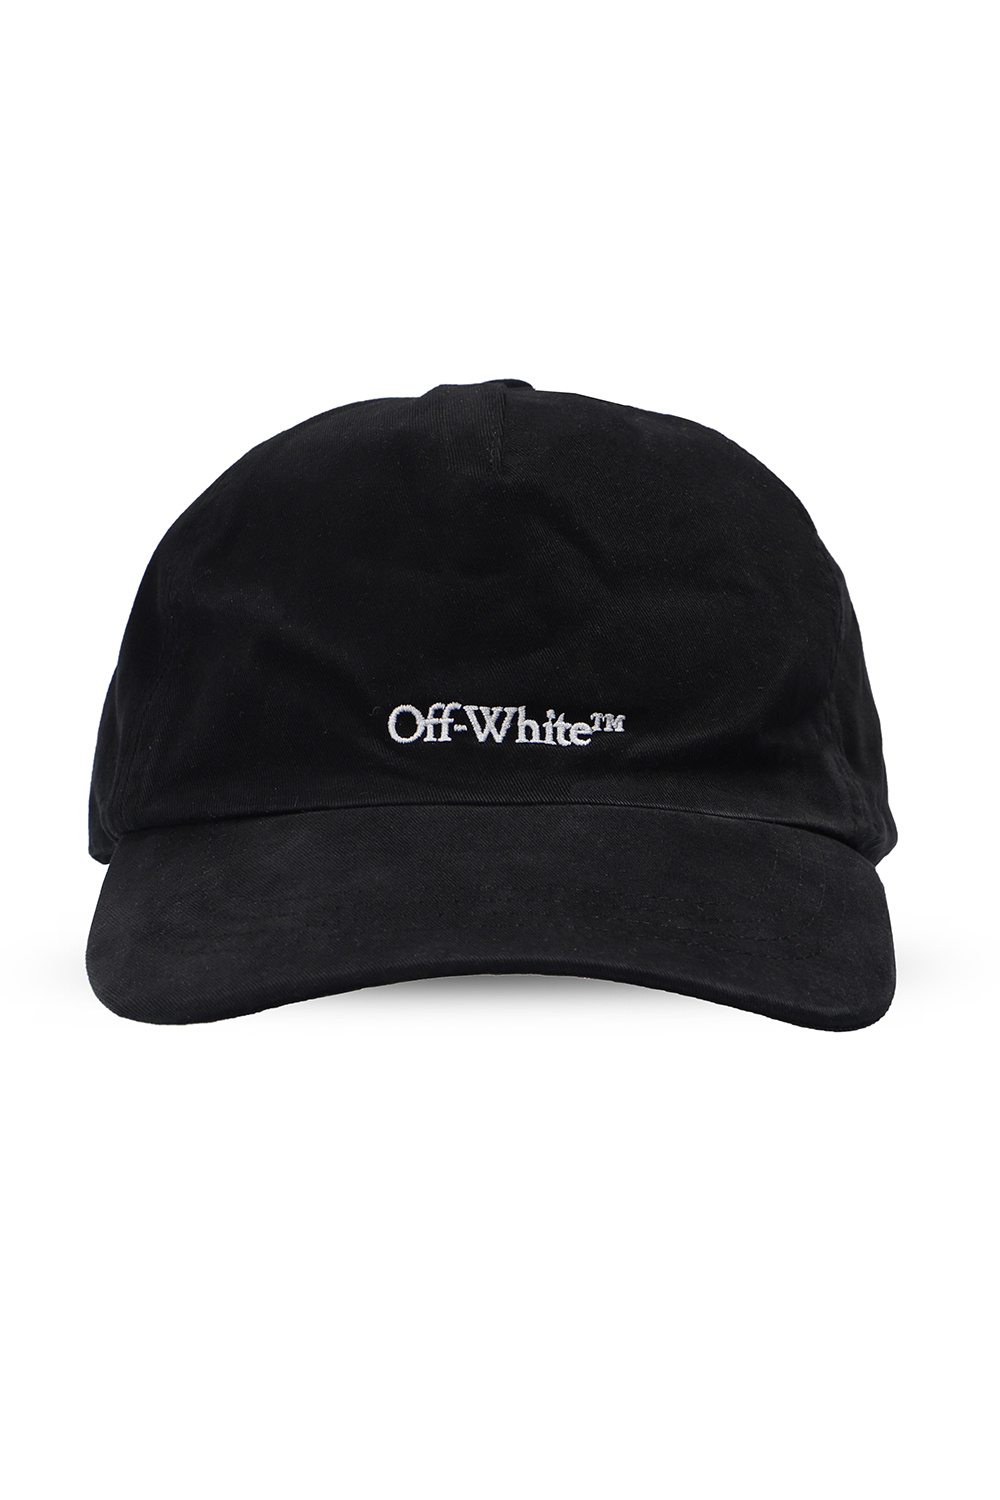 Off-White Palm Angels Woman's White Cotton Classic Bucket Hat With Logo